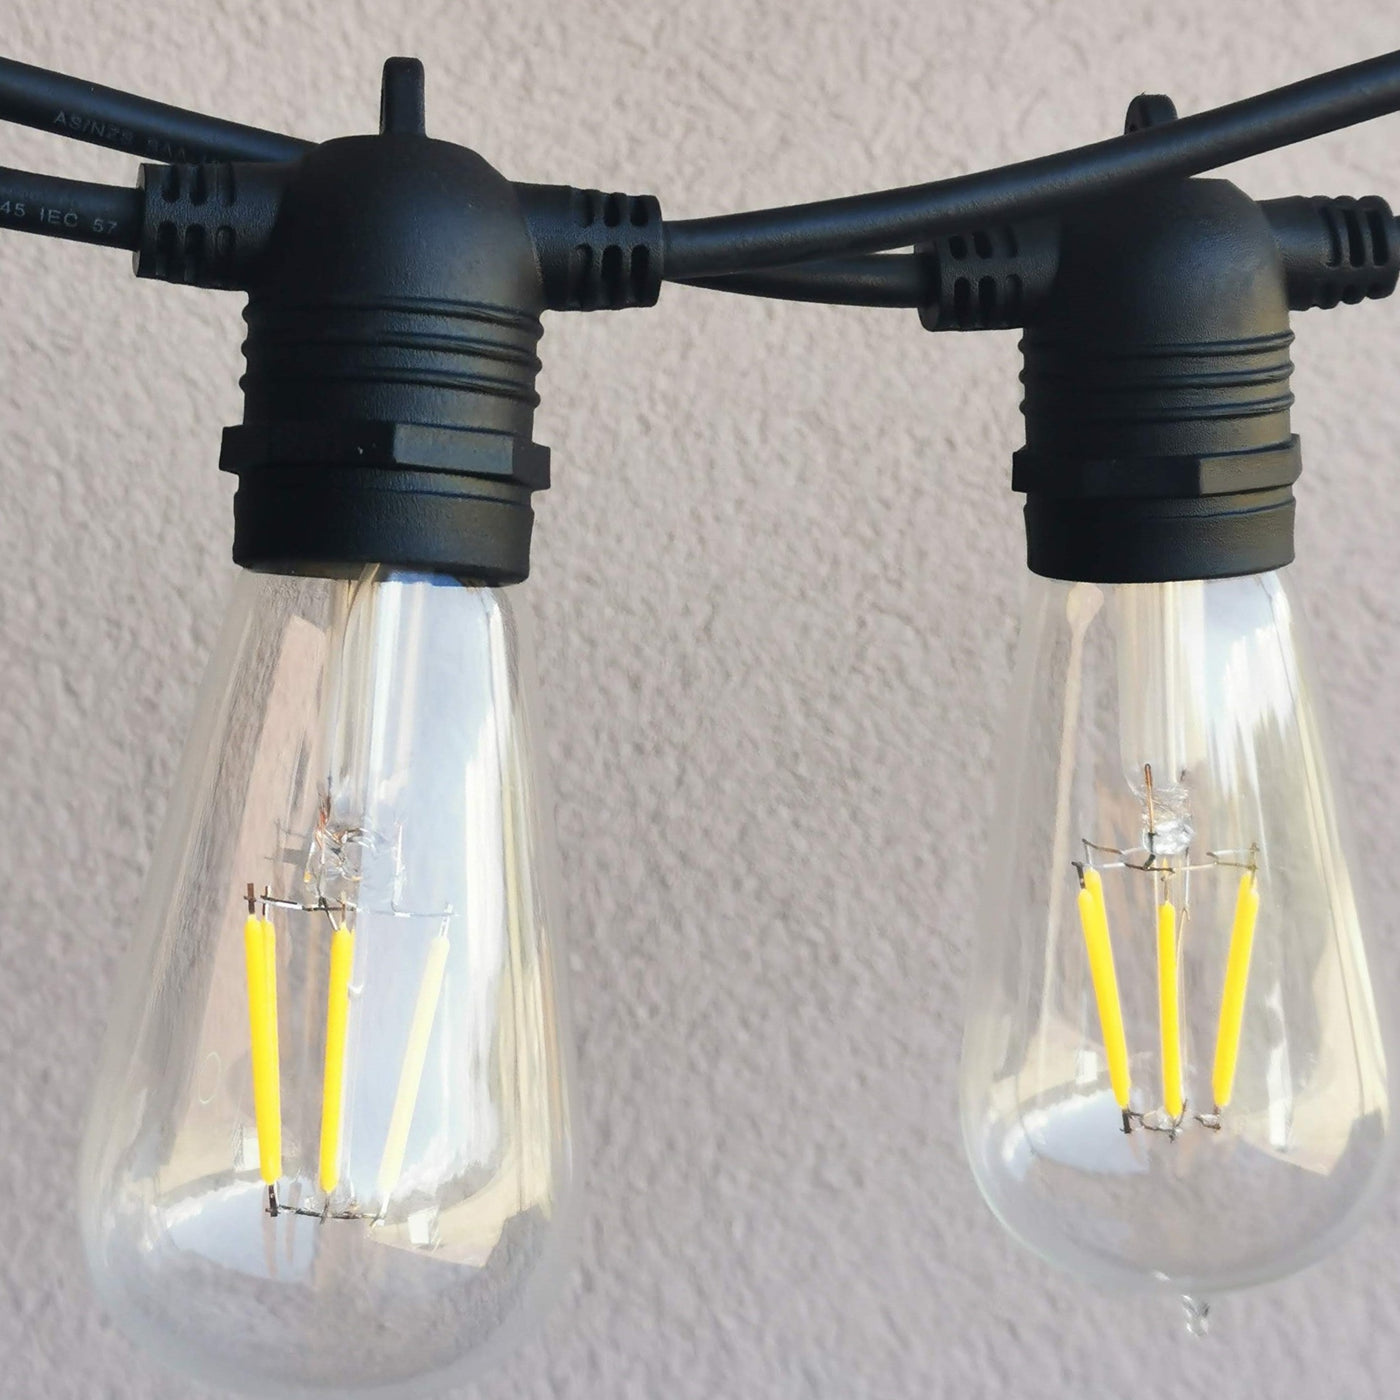 ST58 Amber or Clear Bulb Drop Hang Festoon Lights from Love Your Lights